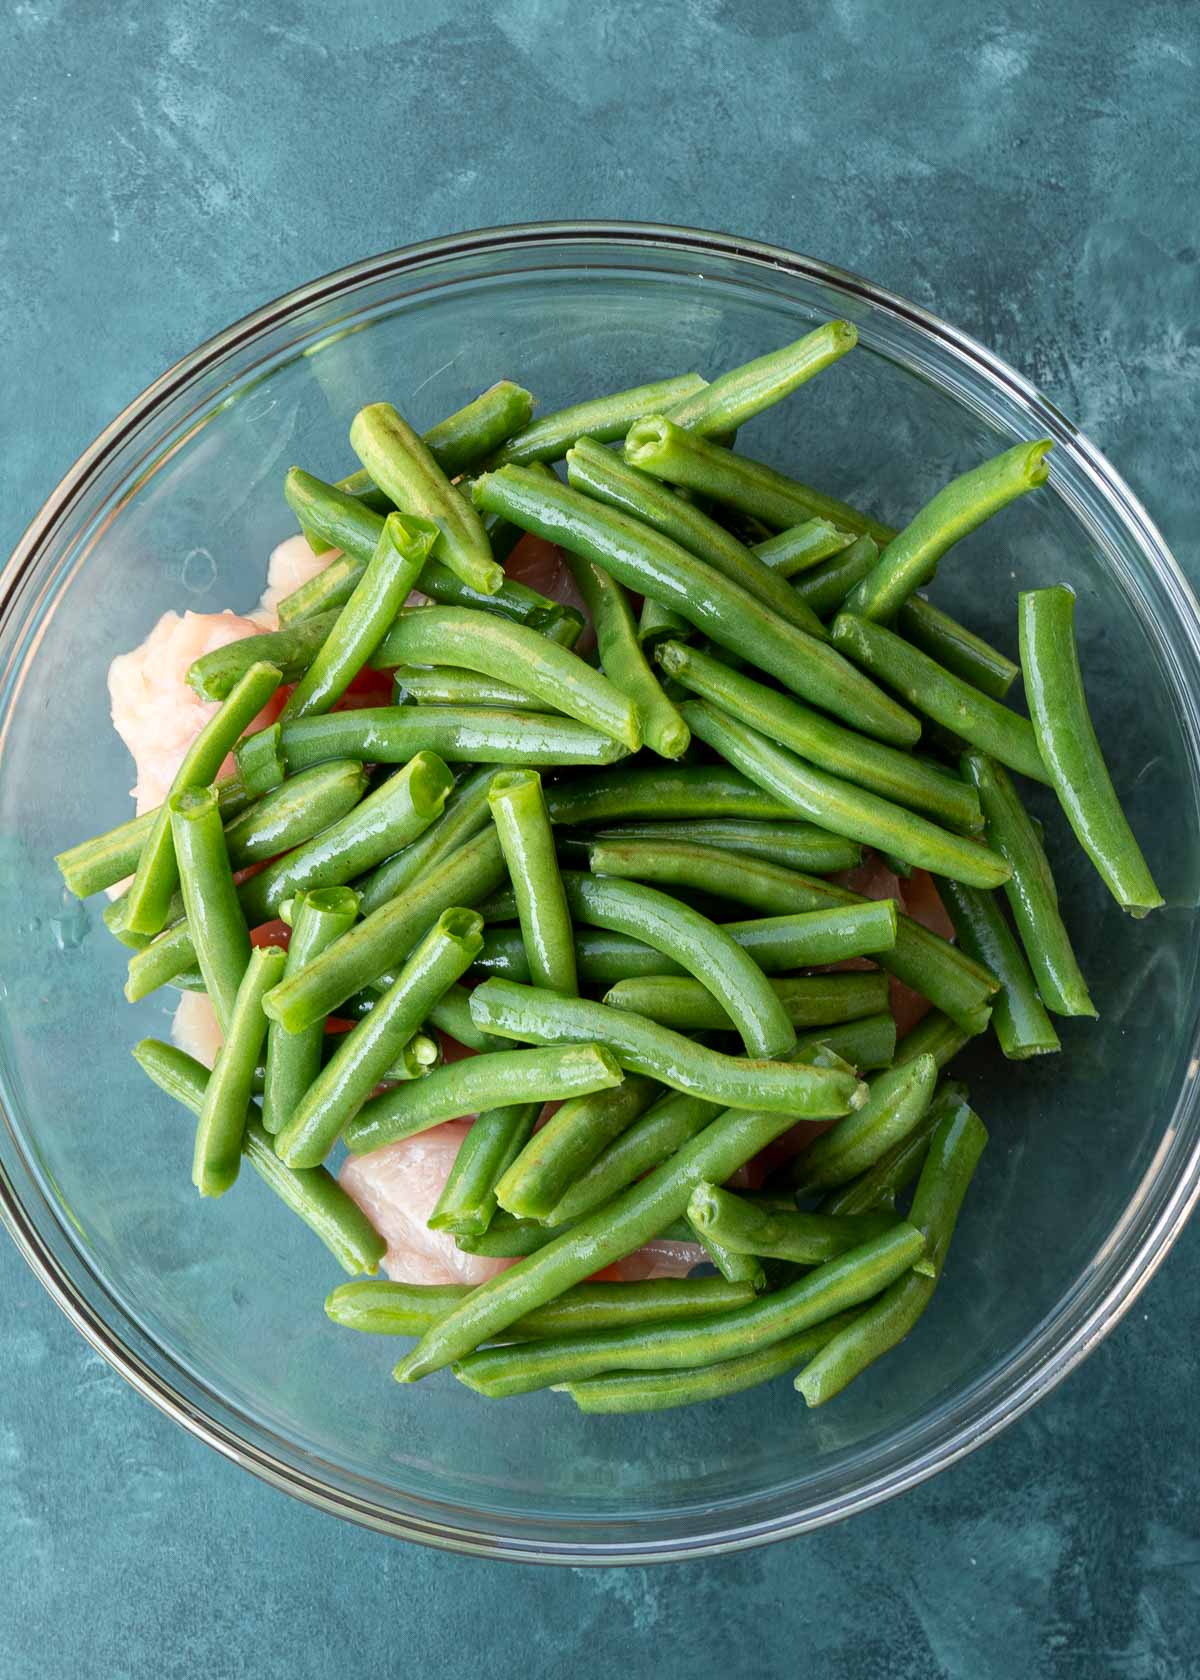 green beans and chicken pieces in a glass bowl